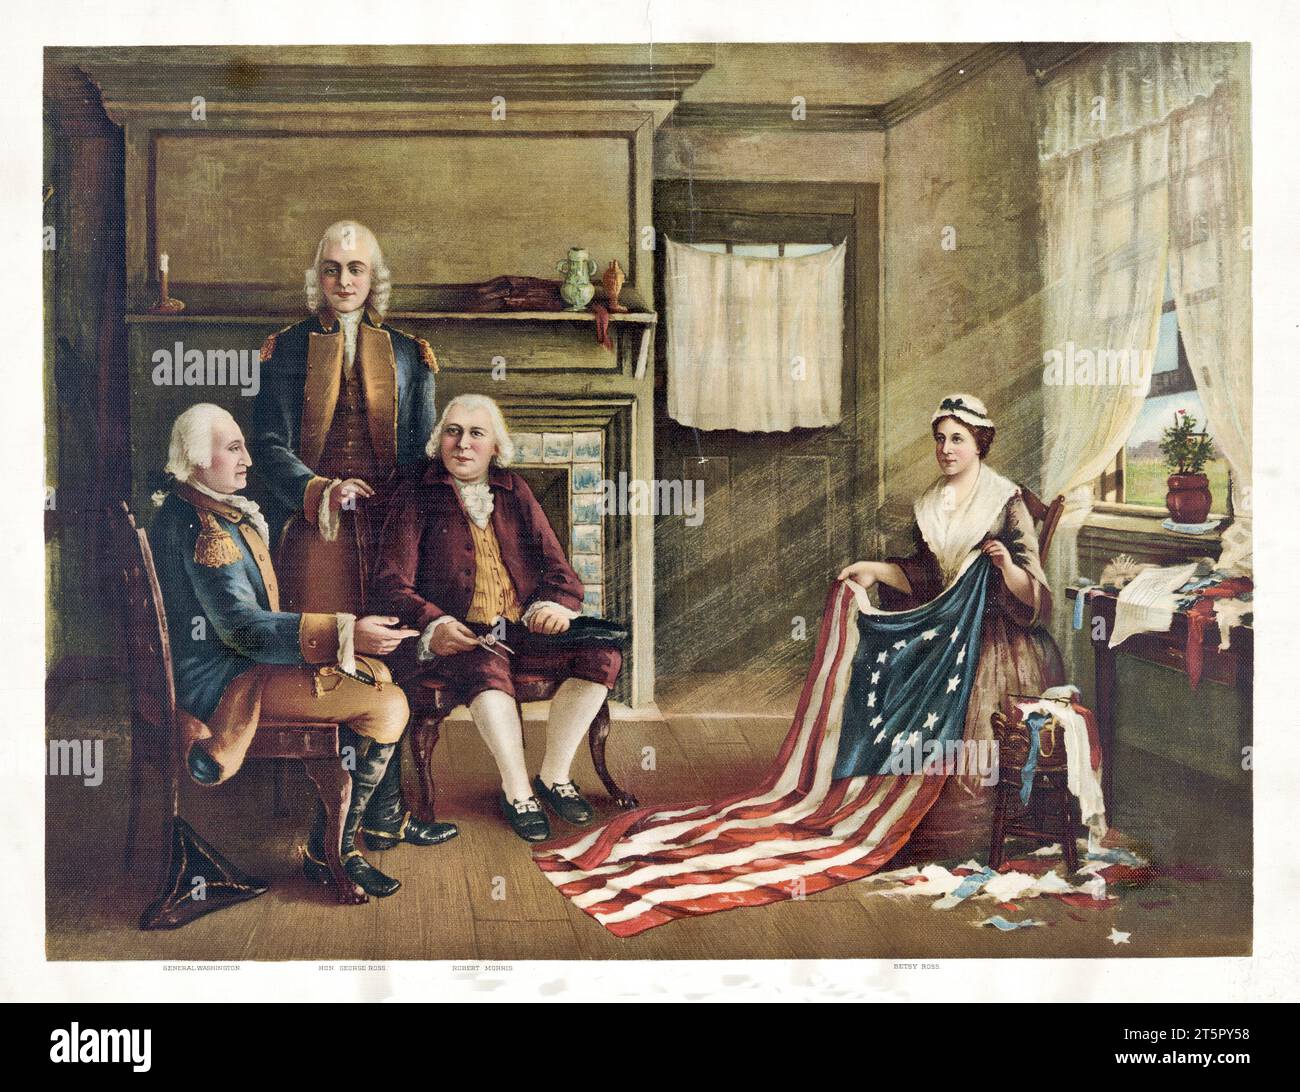 Old illustration showing the birth of American Flag. By Weigsberger, publ. in New York, 1897 Stock Photo